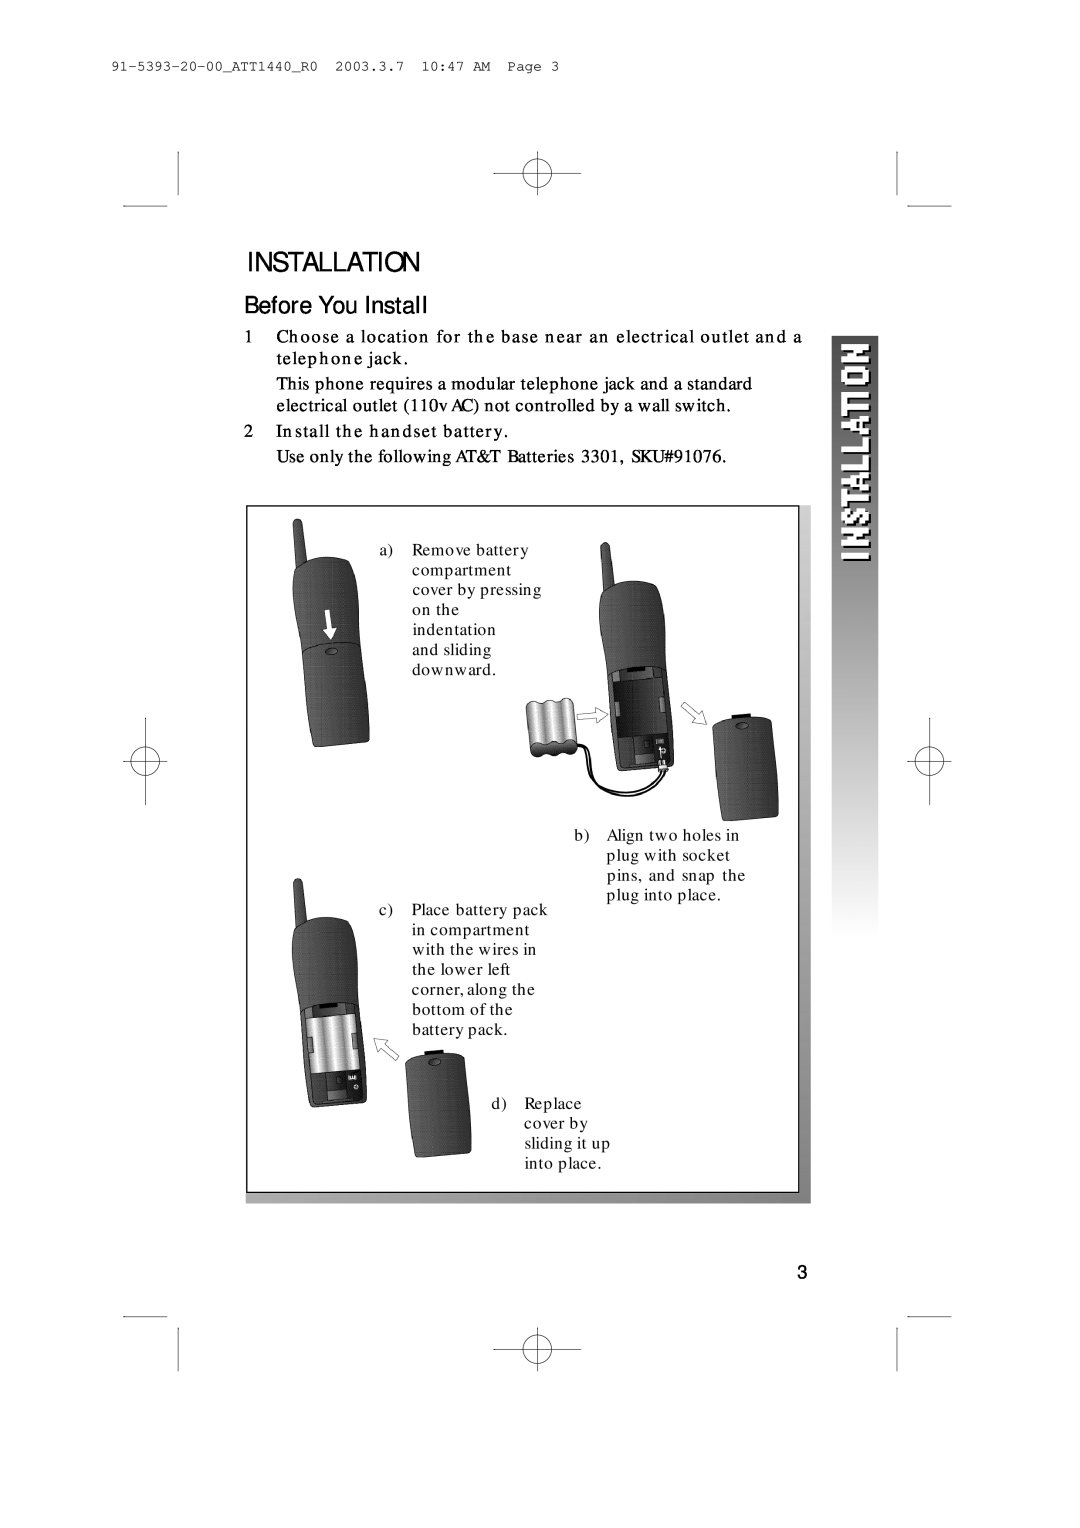 AT&T 1440 user manual Installation, Before You Install, Install the handset battery 